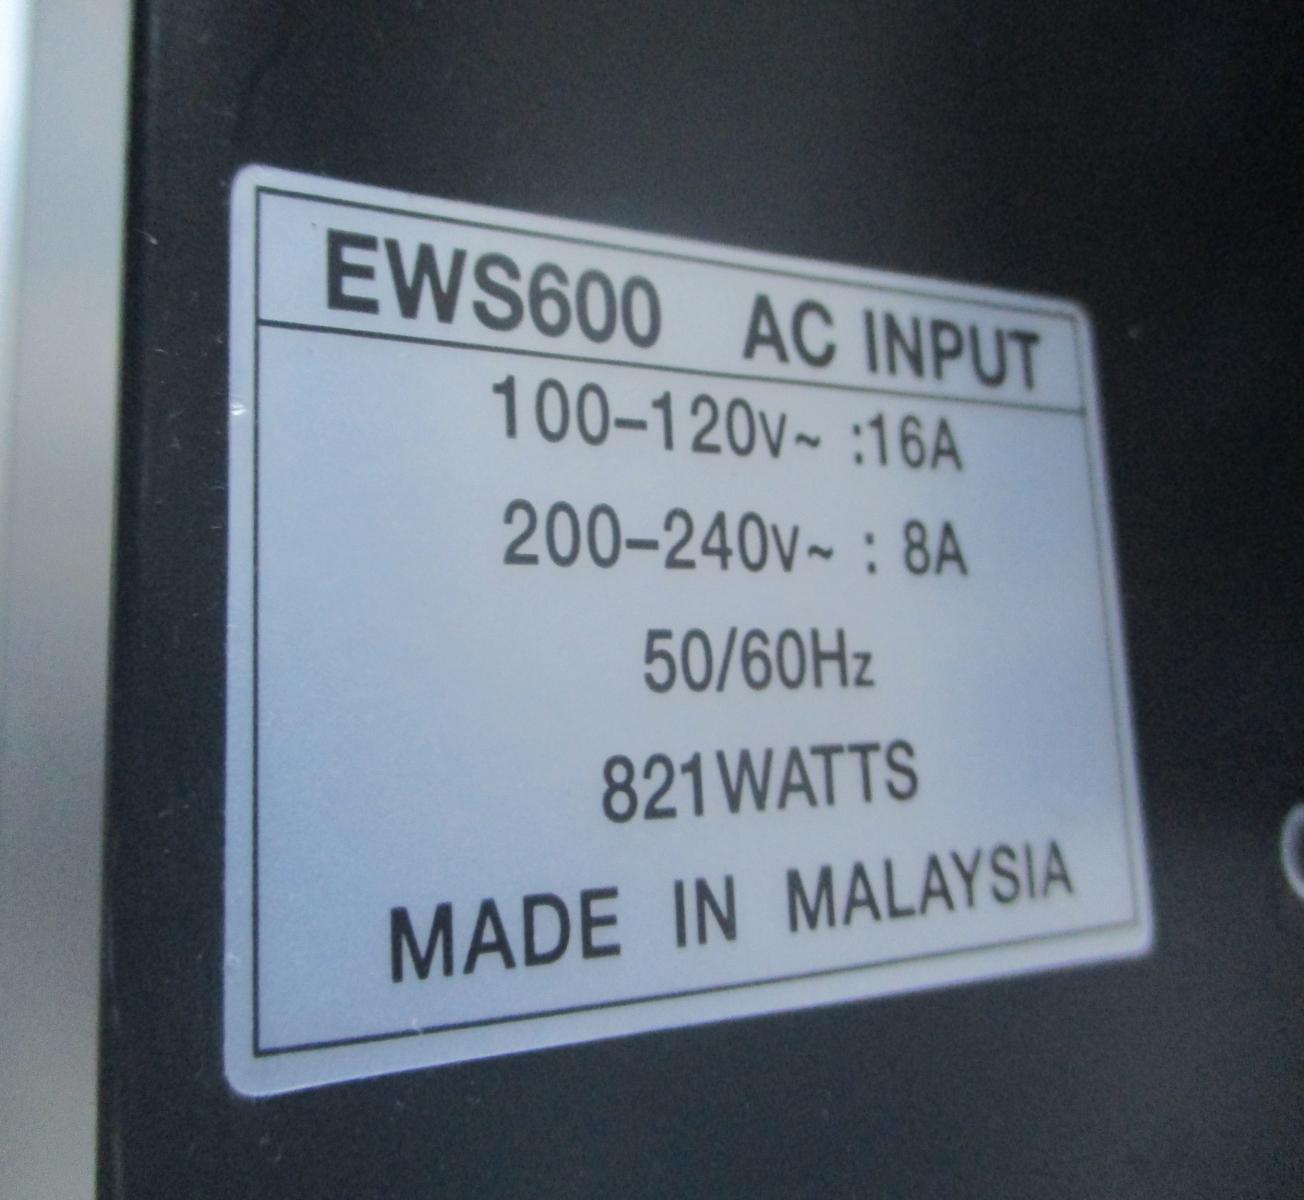 Photo Used AMAT / APPLIED MATERIALS FABS-202 For Sale